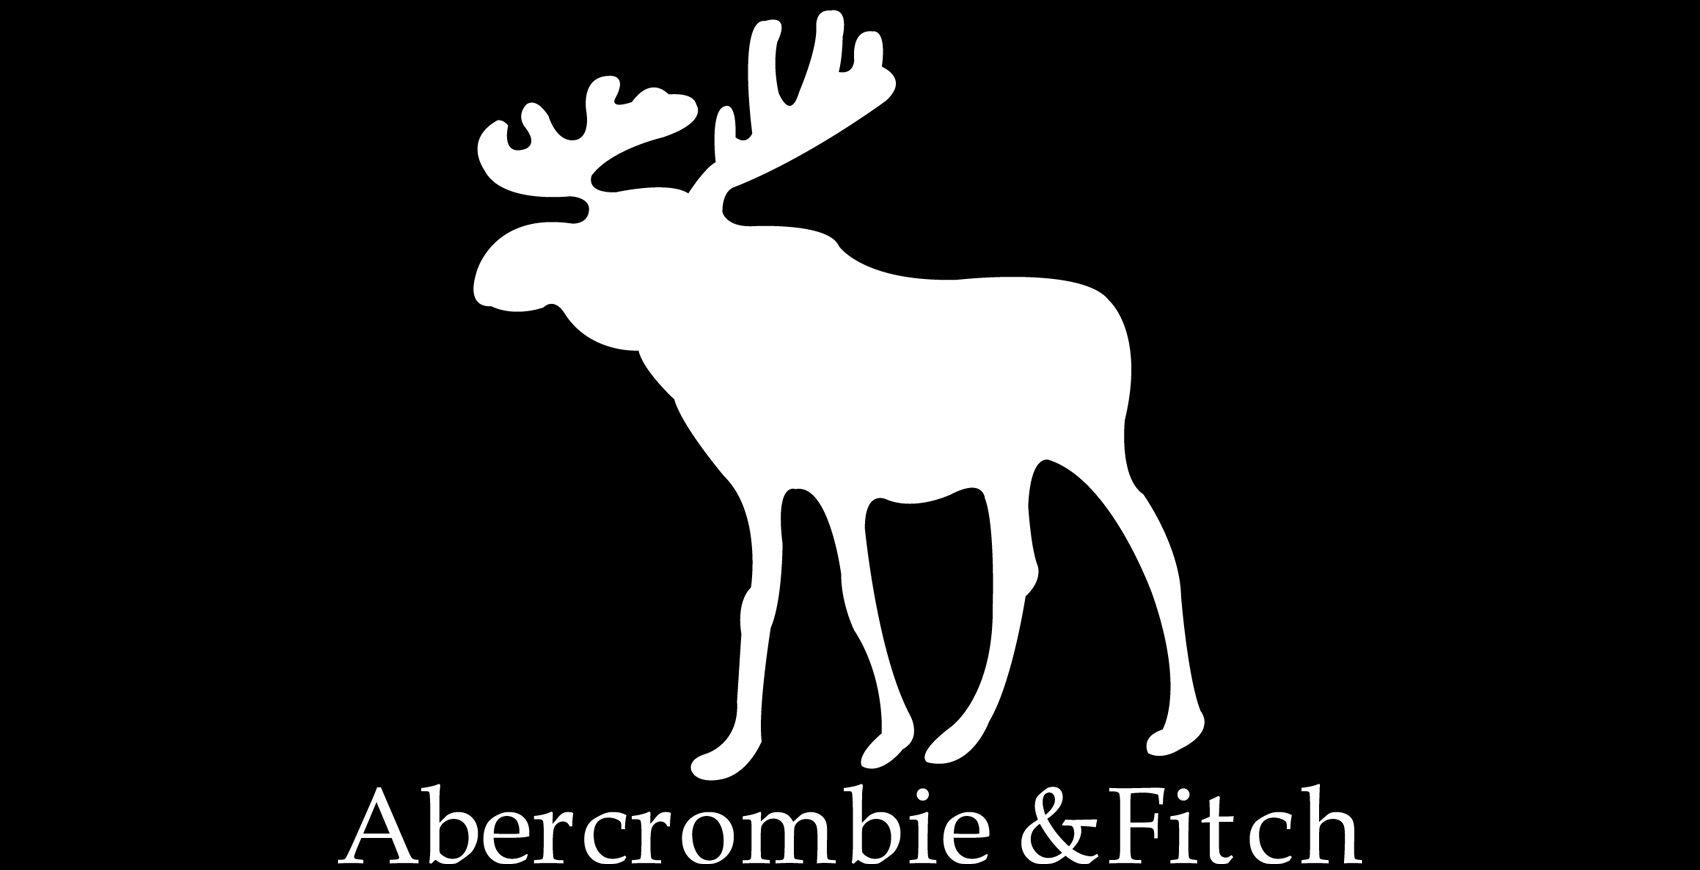 Abercrombie and Fitch Logo - Abercrombie and Fitch Logo, Abercrombie and Fitch Symbol Meaning ...